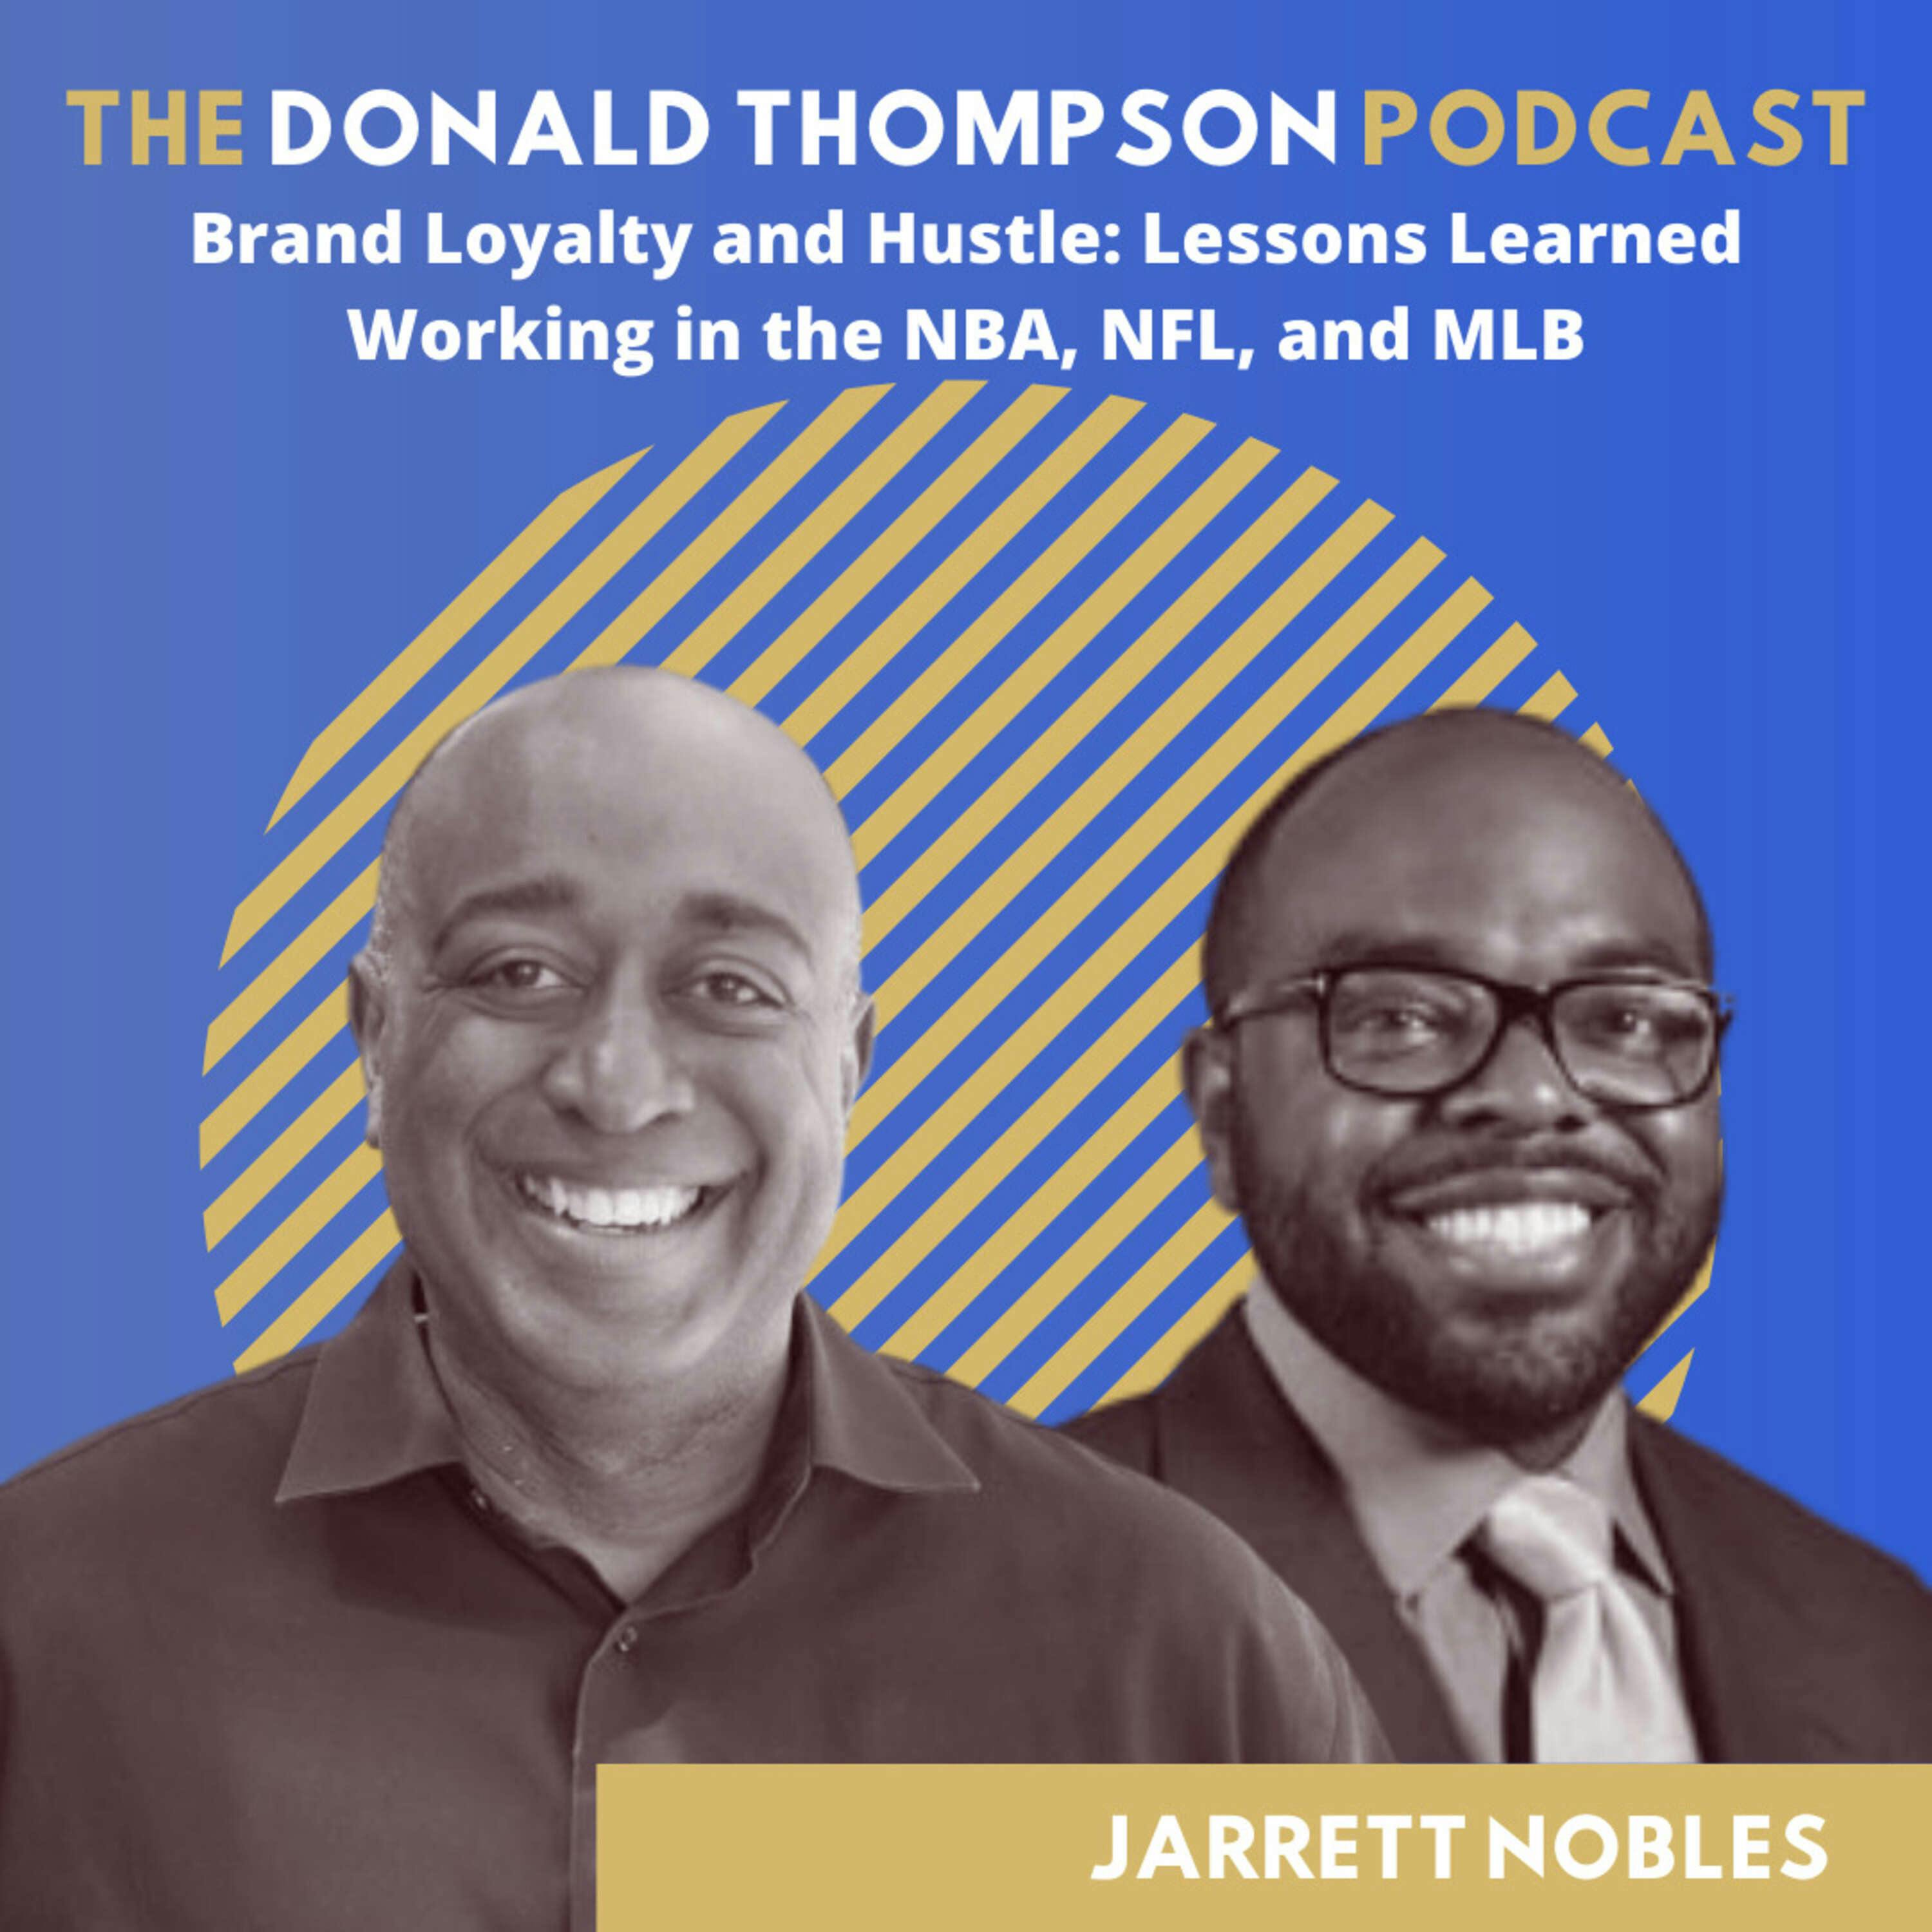 Brand Loyalty and Hustle: Lessons Learned Working in the NBA, NFL, and MLB, with Jarrett Nobles